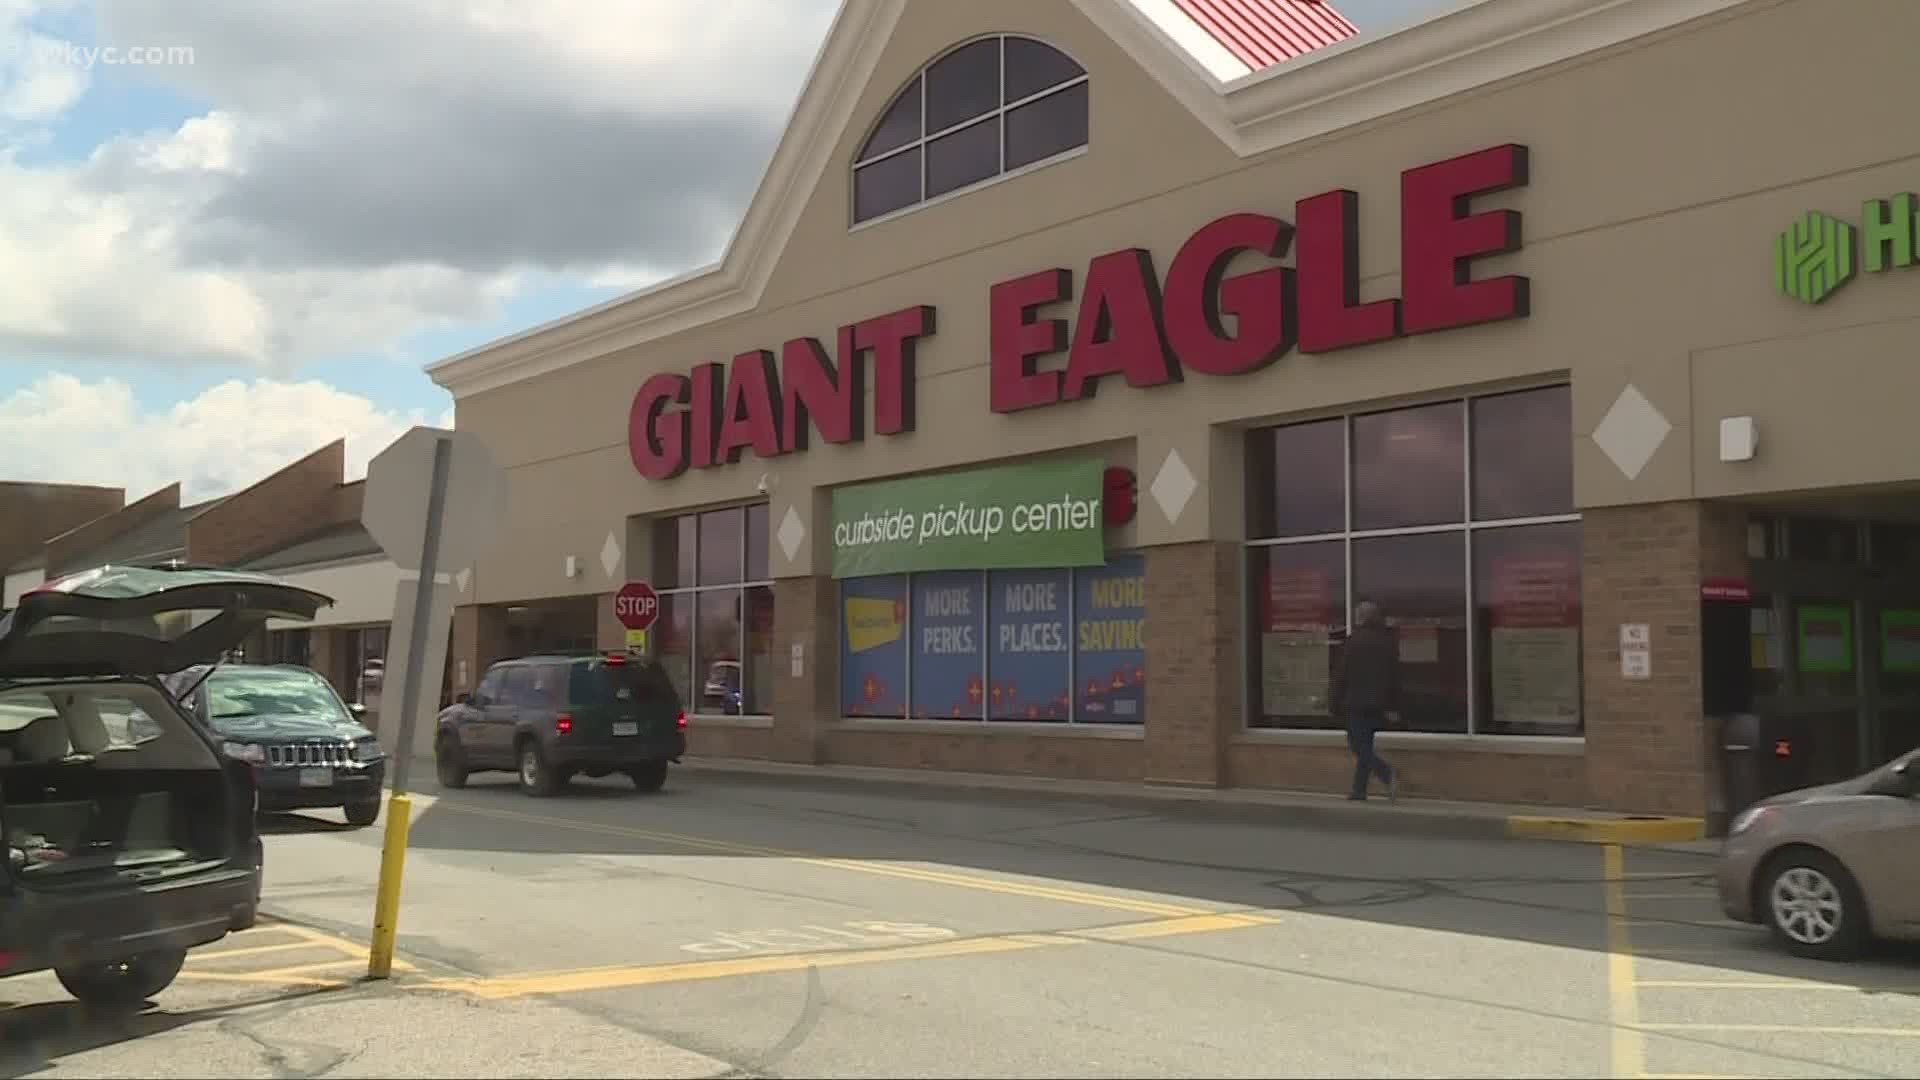 Giant Eagle to close stores & GetGo locations for 1 hour Saturday to